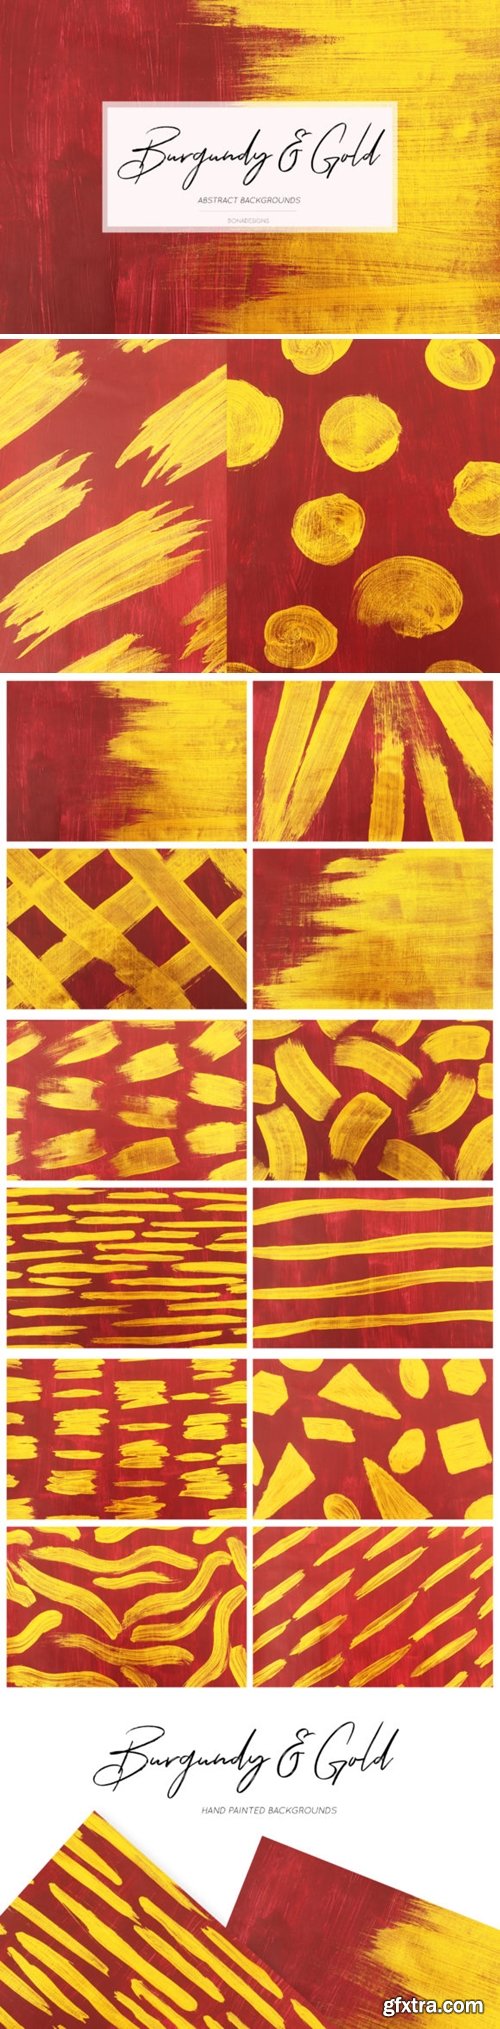 Burgundy & Gold Abstract Backgrounds 1588157